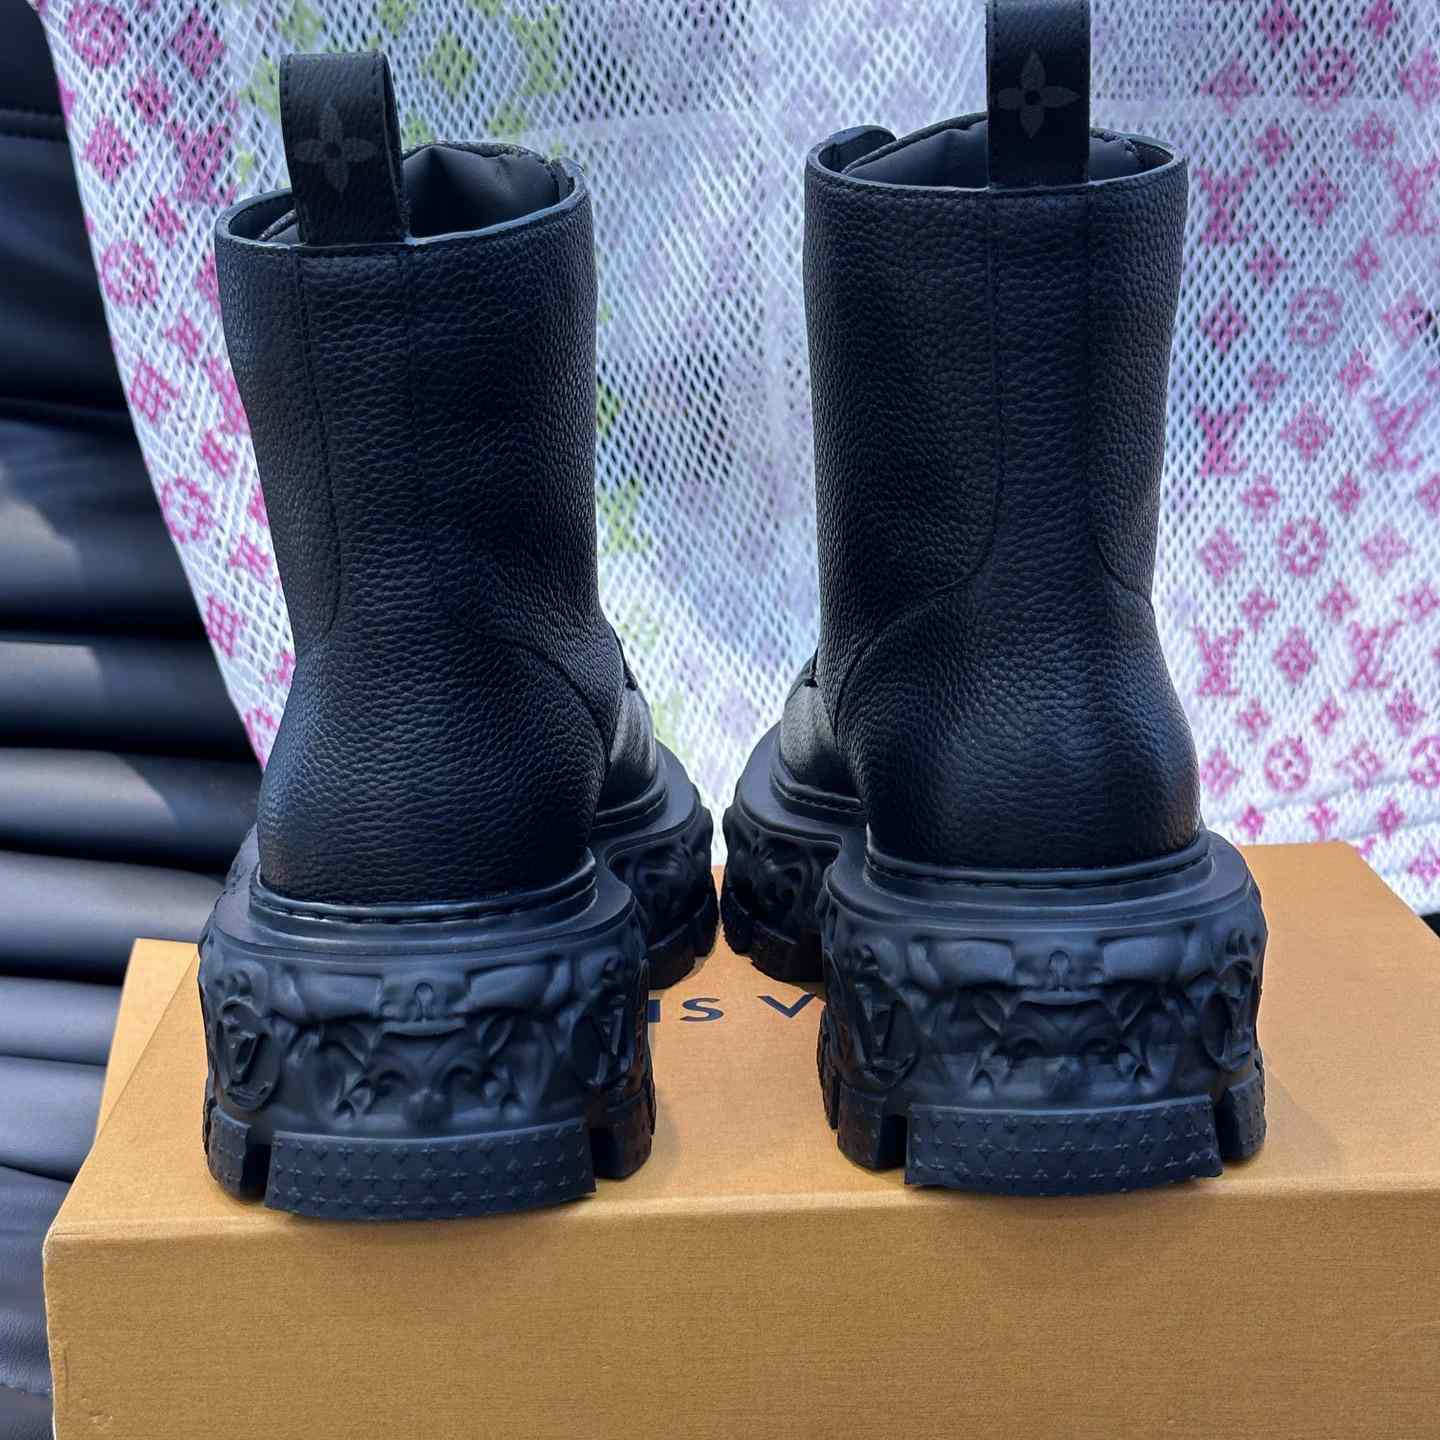 LOUIS VUITTON BAROQUE RANGER BOOT (1AB8NH) SOLD OUT